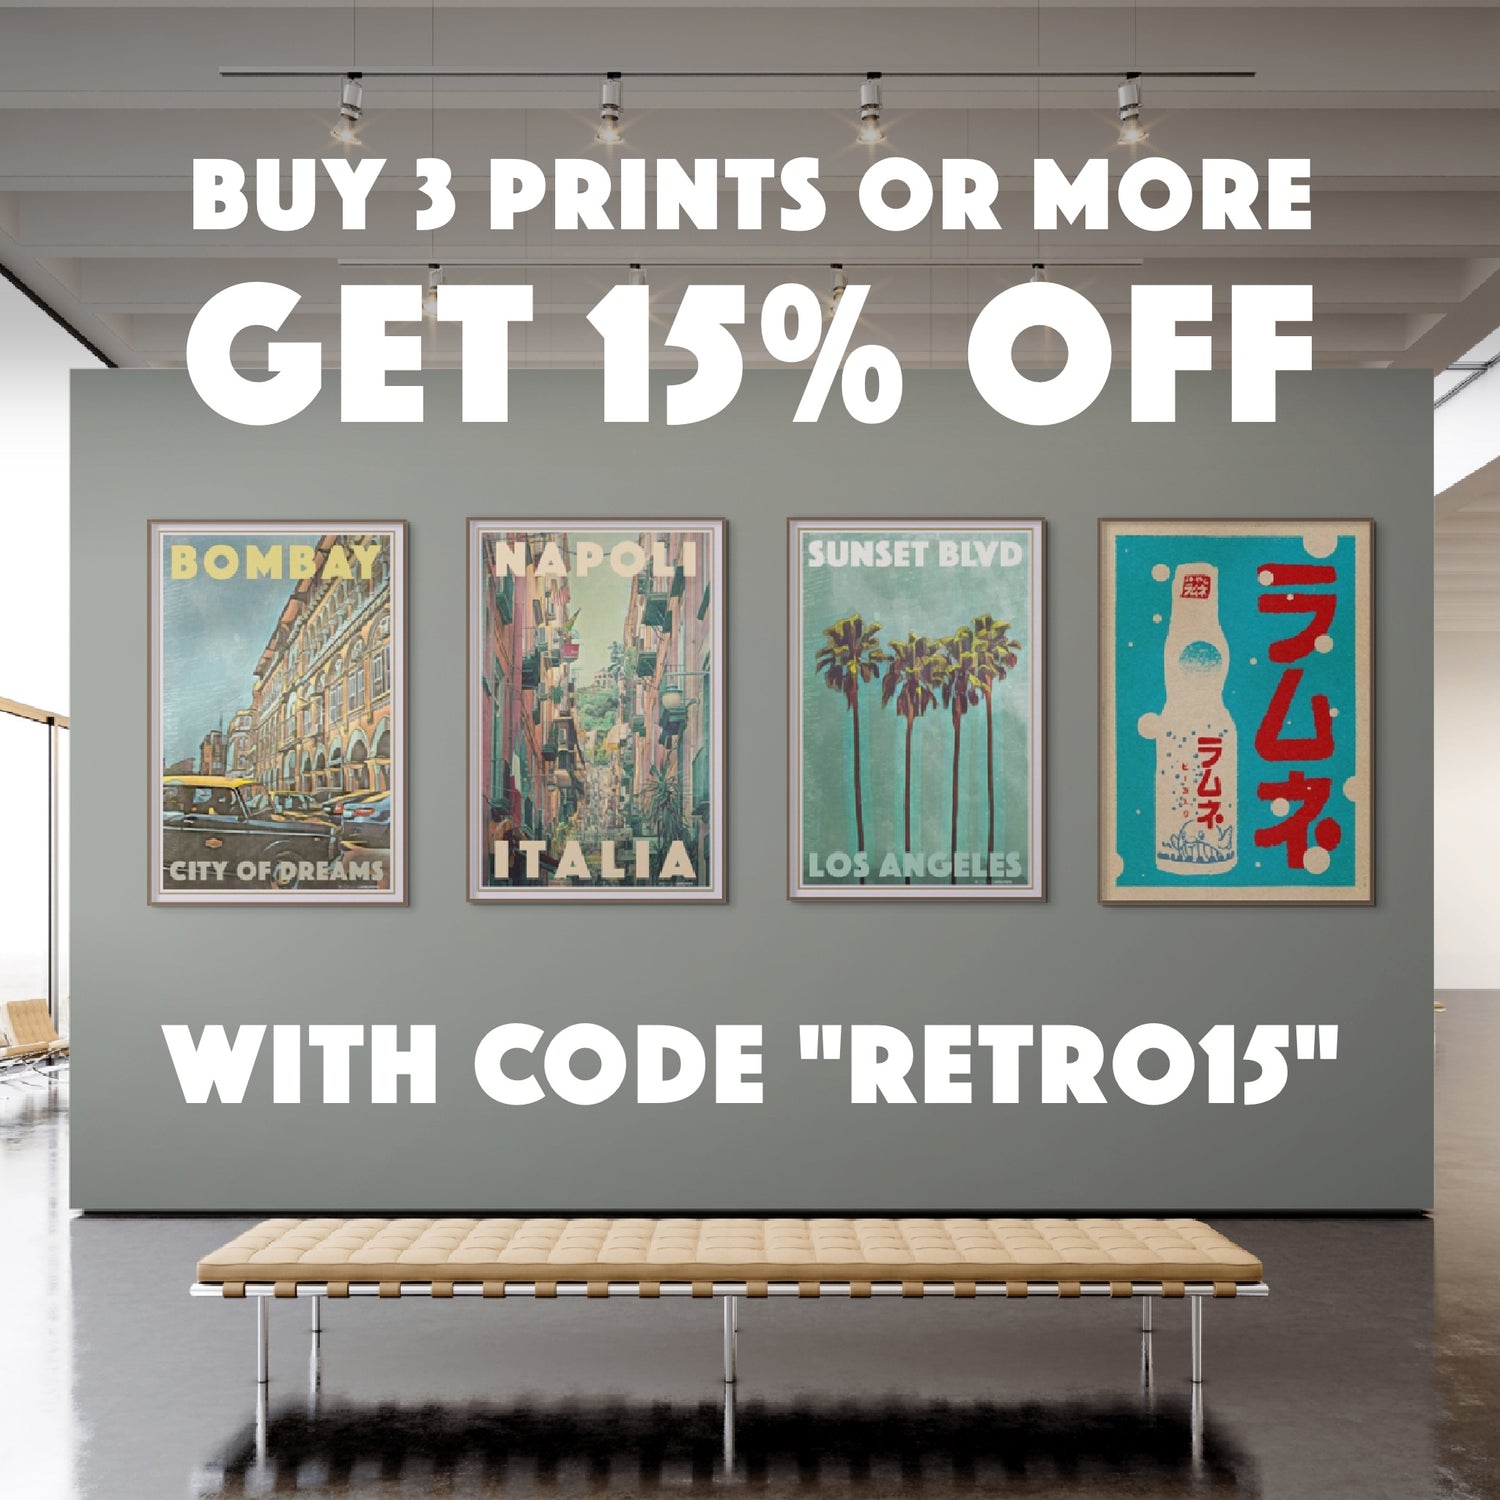 15% off deal on vintage travel posters